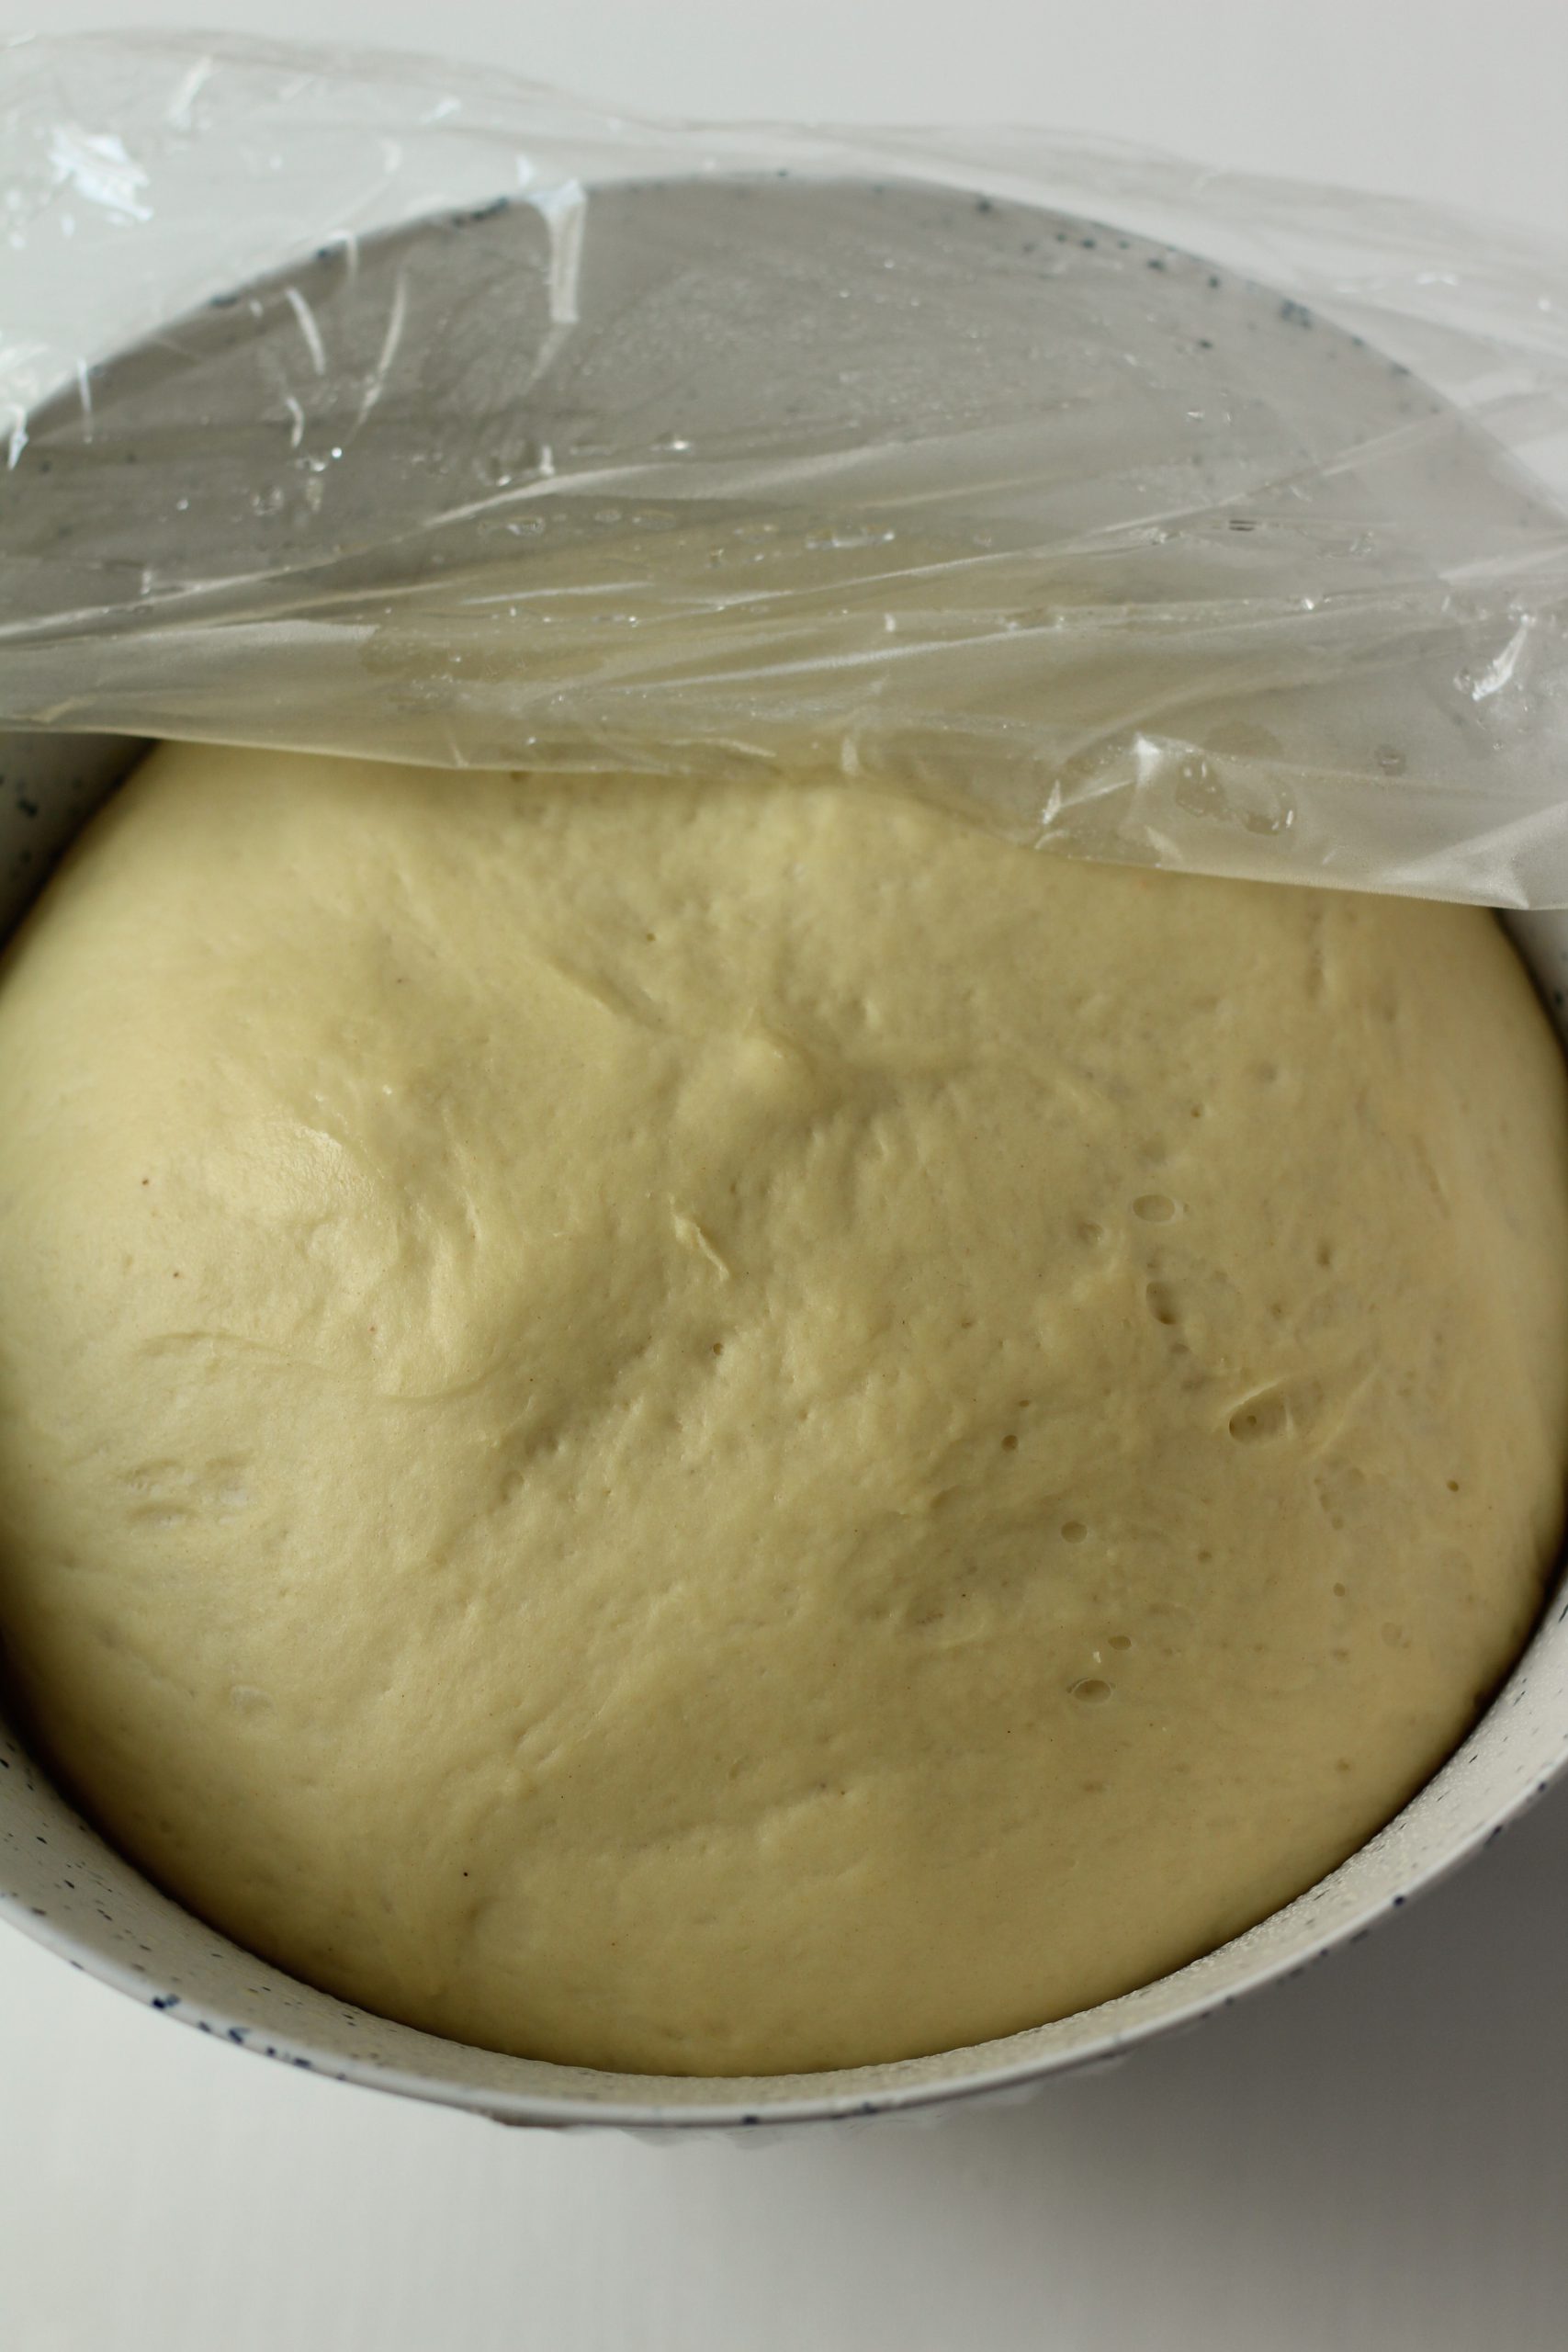 After first rise dough doubled in size